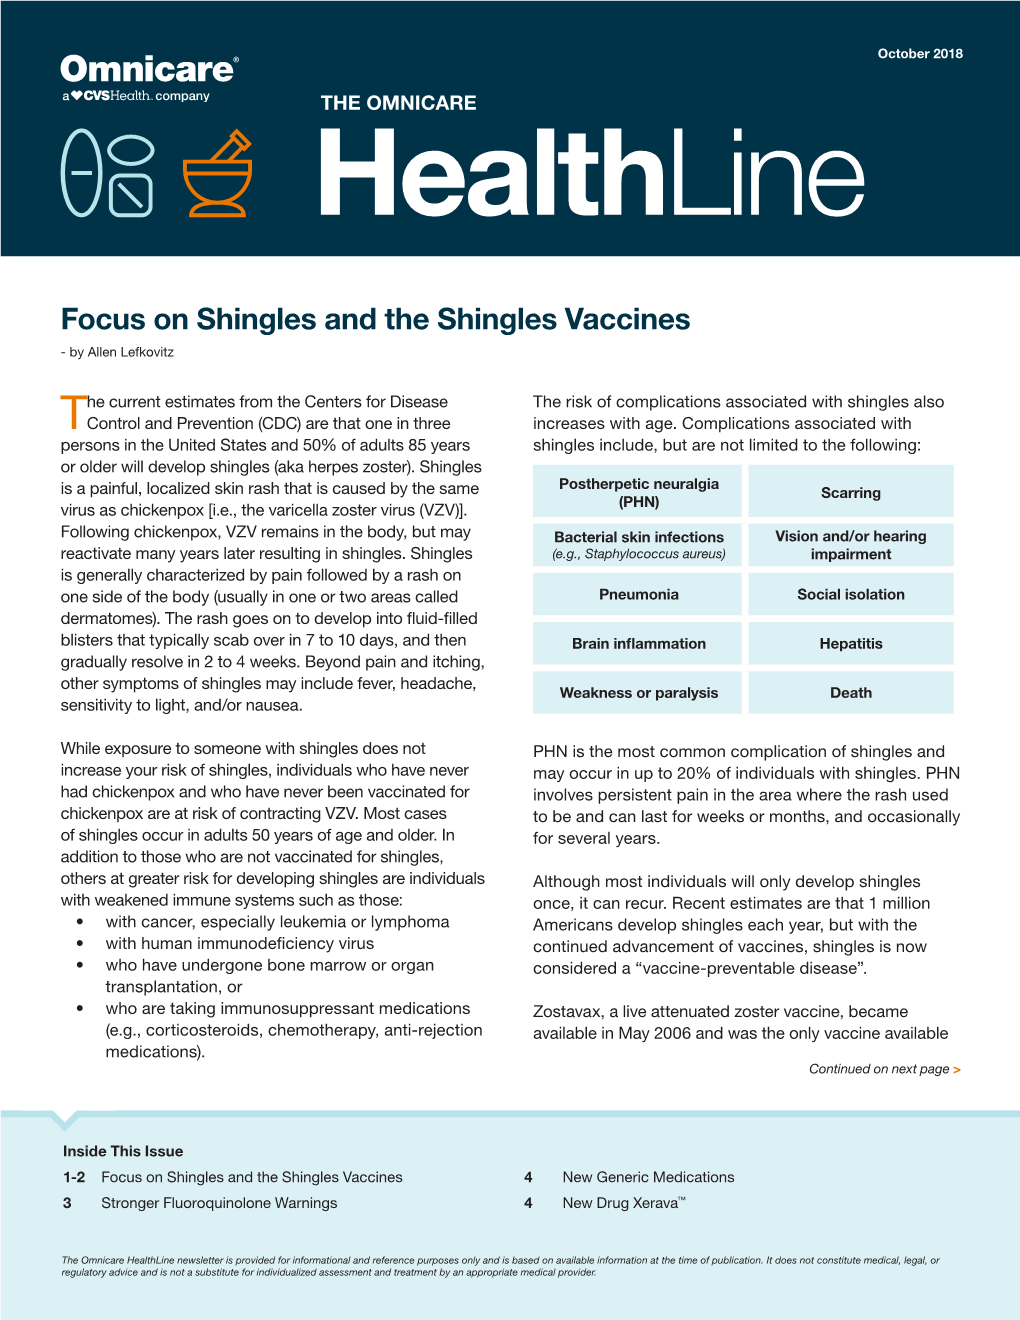 Focus on Shingles and the Shingles Vaccines - by Allen Lefkovitz